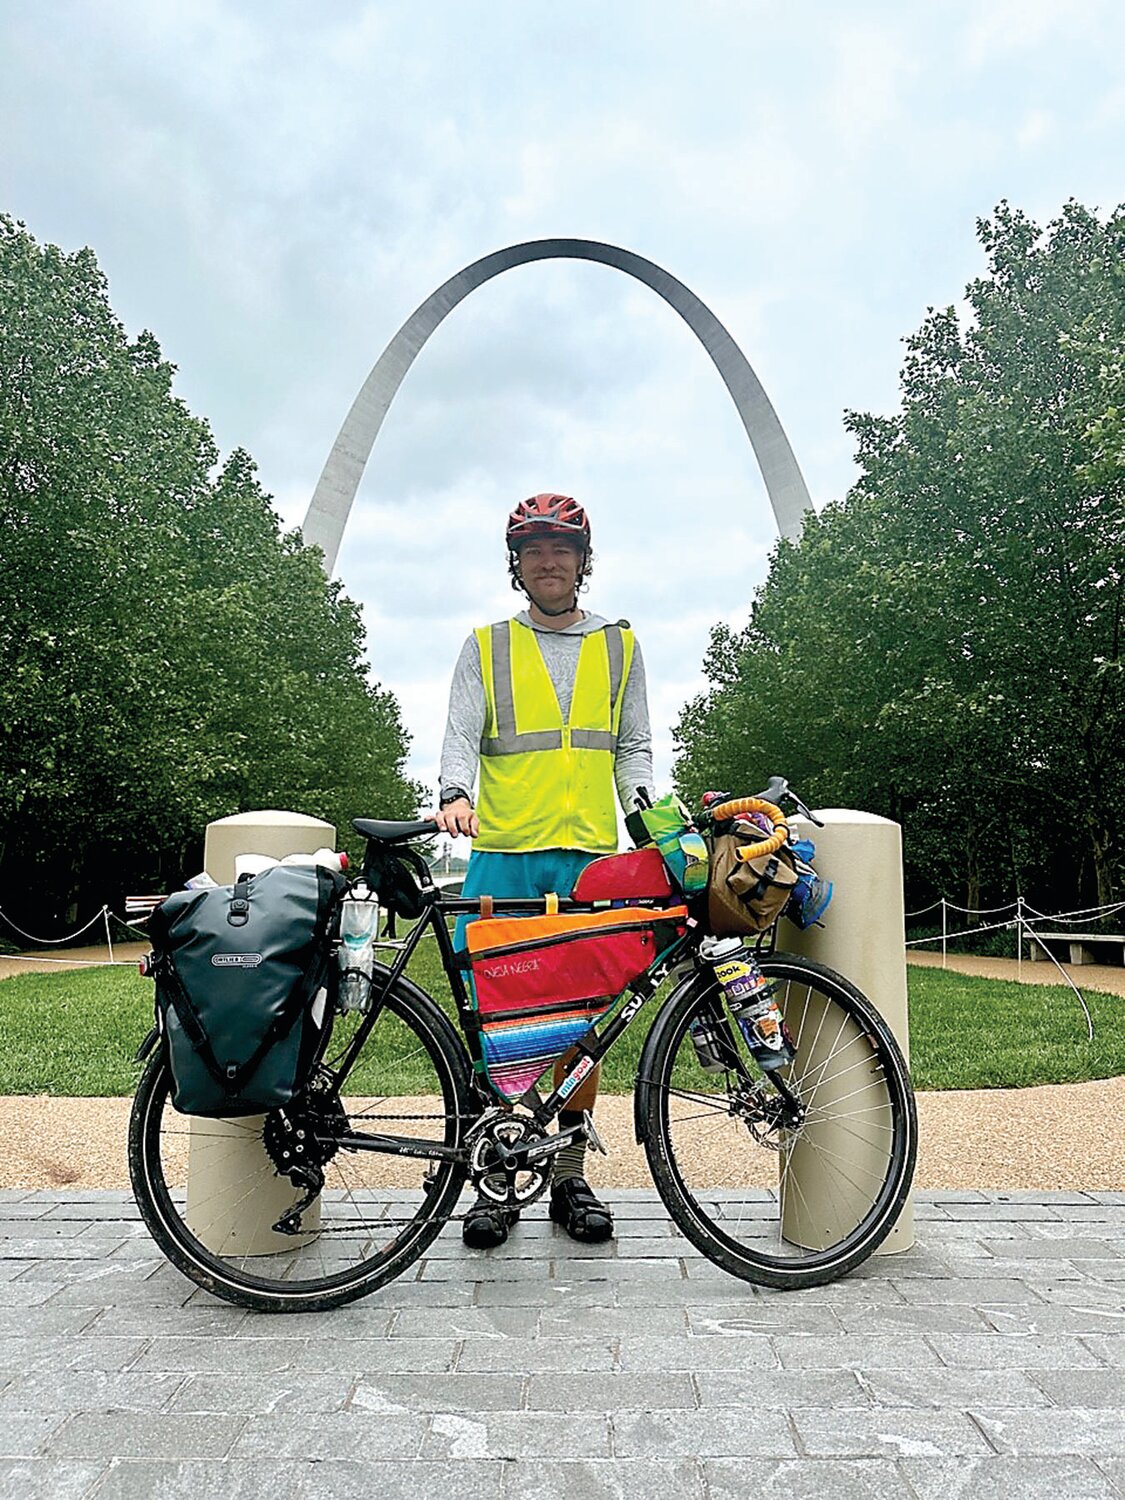 Spencer McCullough, who grew up in Yardley, poses under the Gateway Arch in St. Louis. The Gateway Arch National Park is near the starting point of the famous Lewis and Clark Expedition. McCullough is on an expedition of his own.